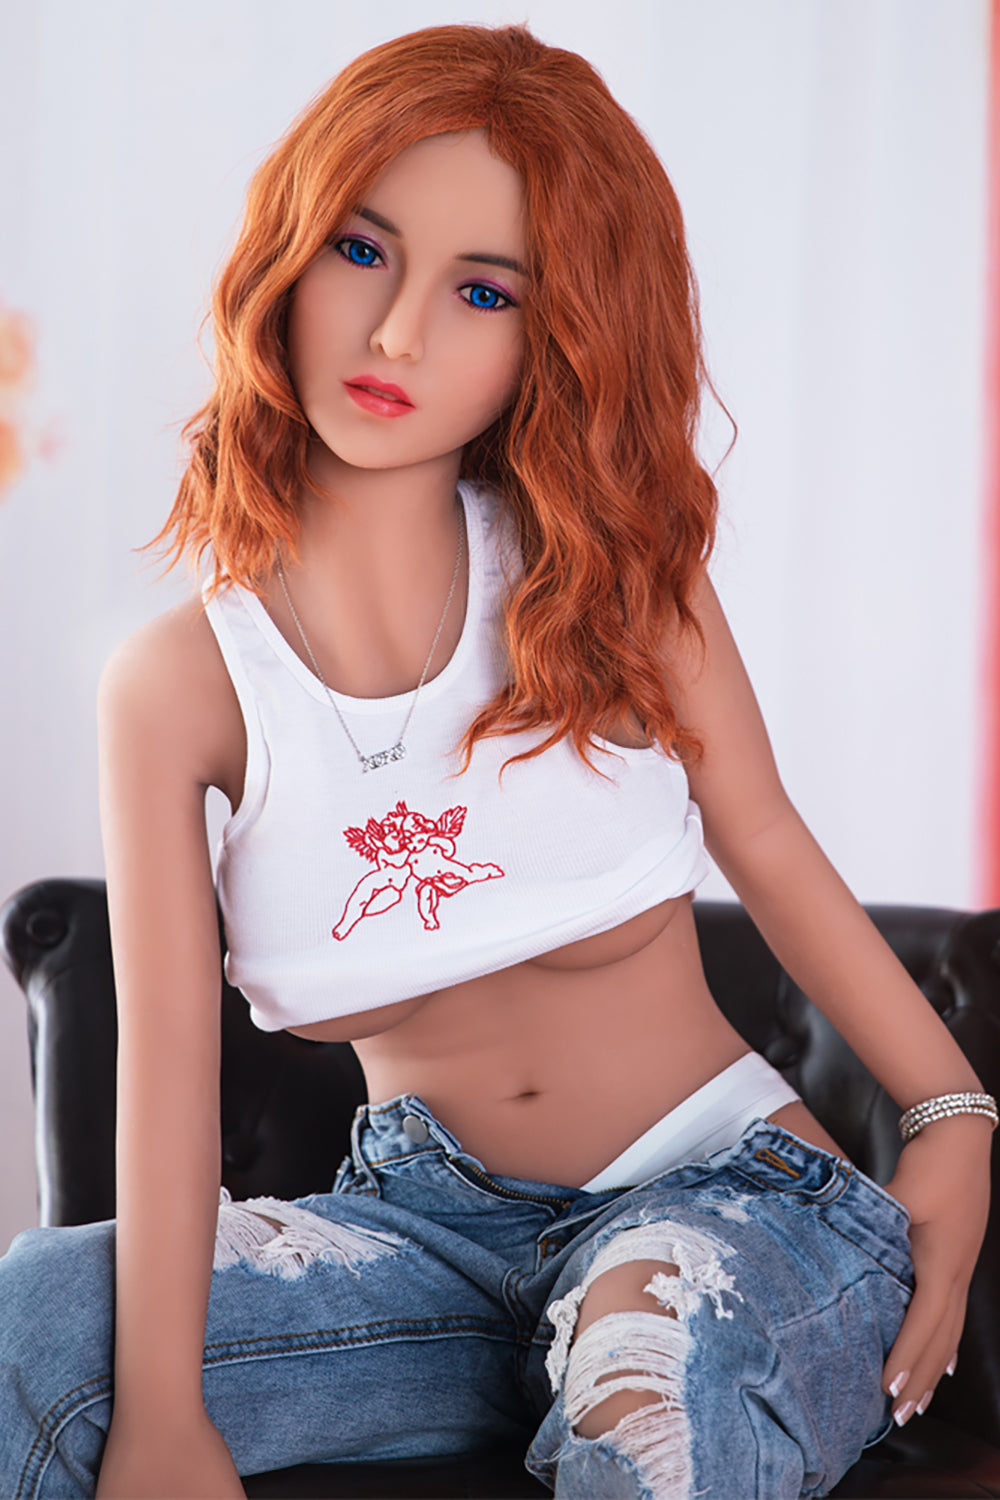 US Stock - Haven 150cm 187# Head Nature Skin Sexy Real Love Doll TPE Sex Doll